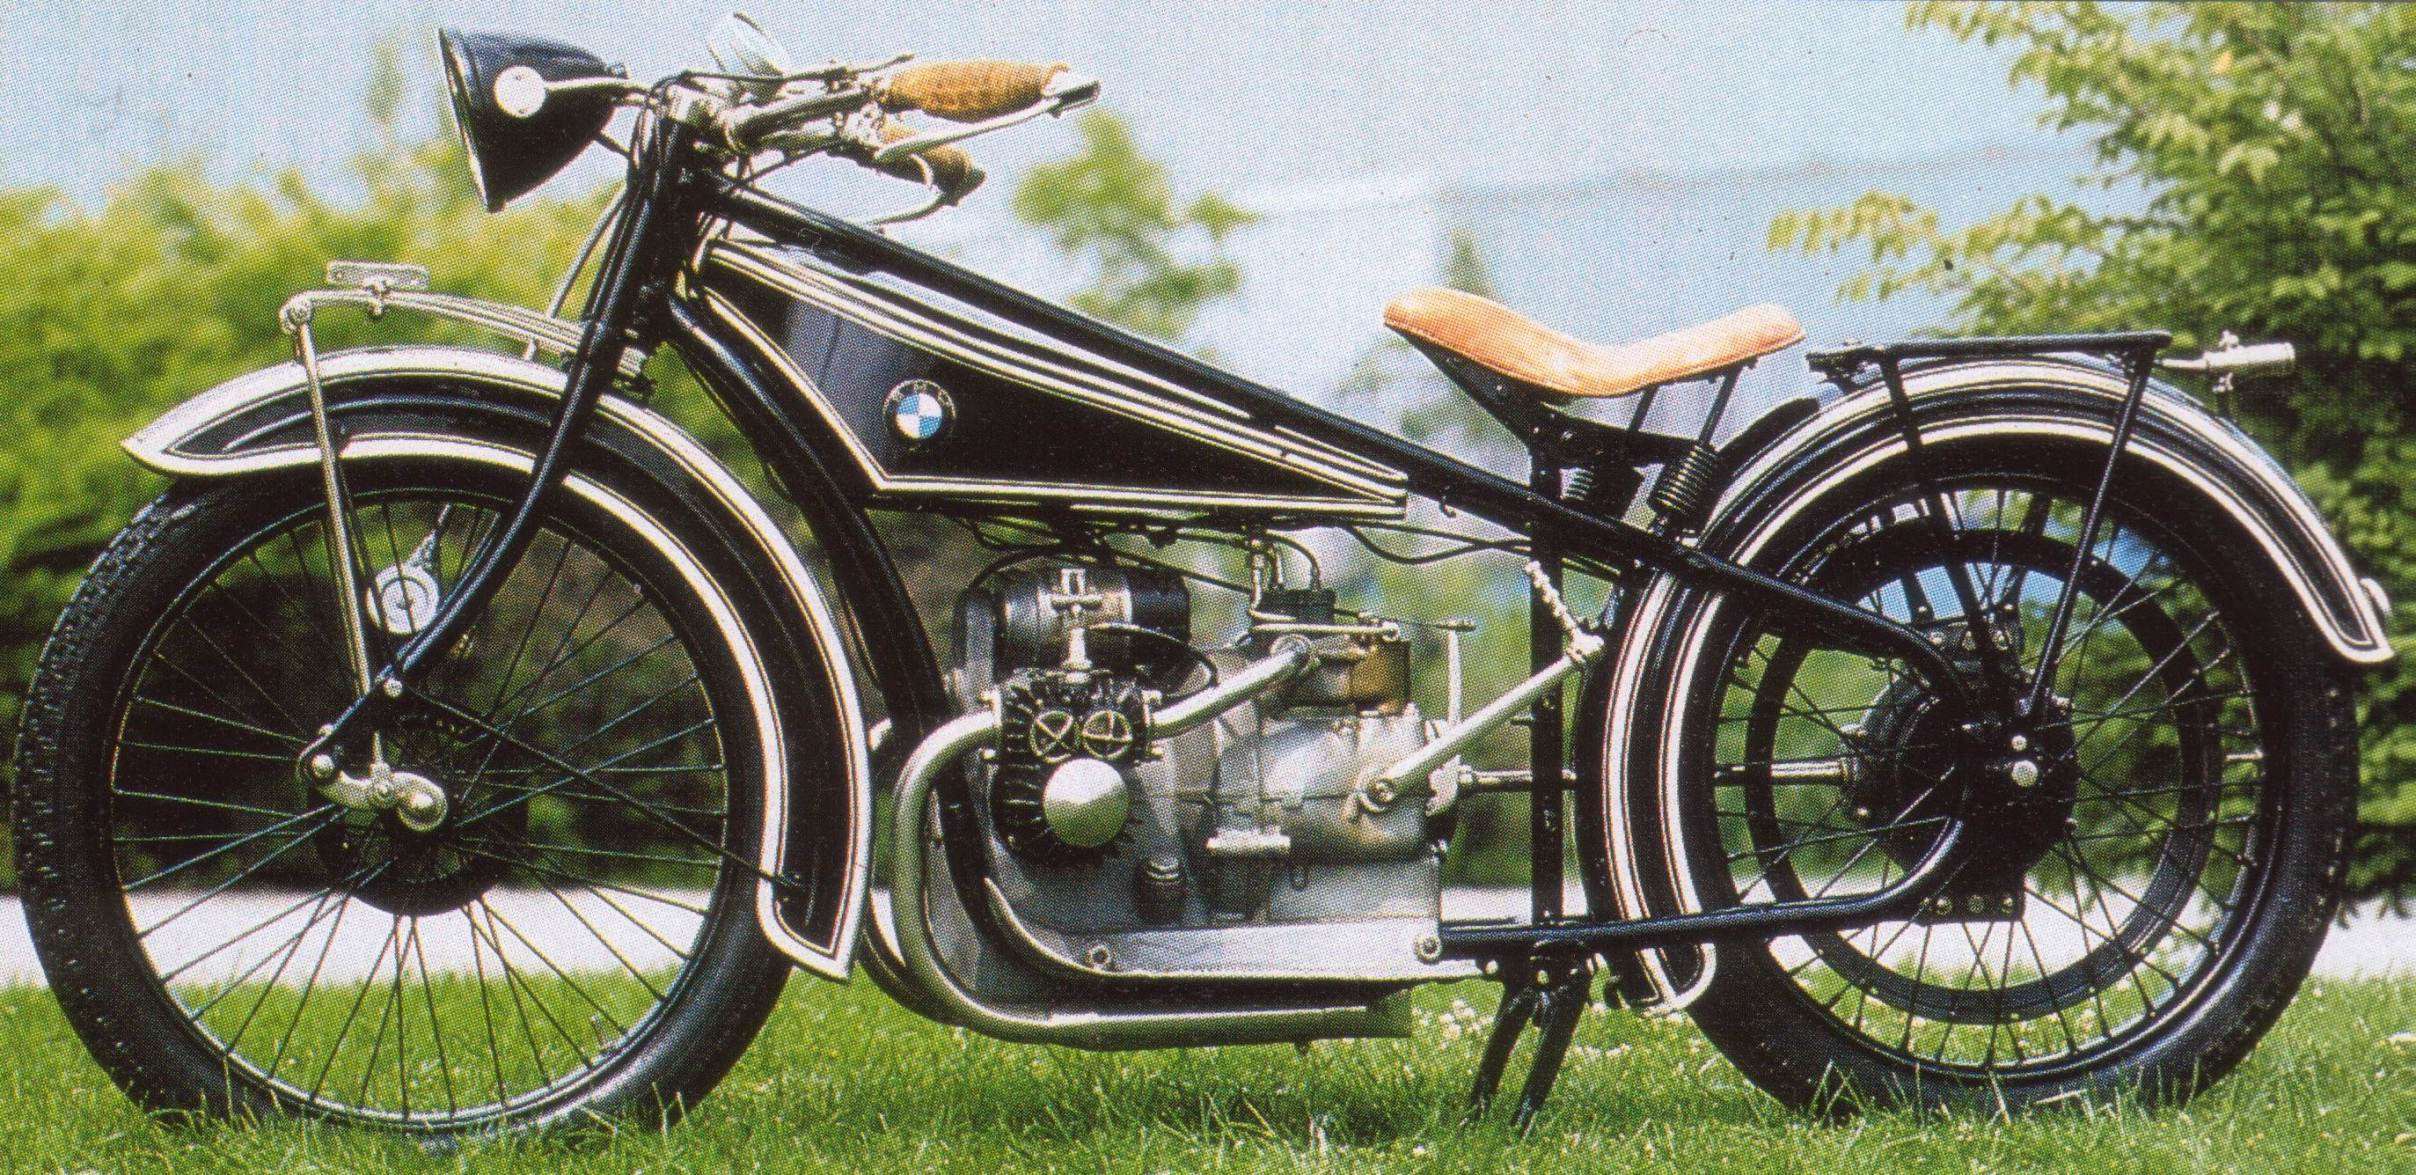 BMW R32 Classic Motorcycle, One of The Most Expensive Classic Bike in